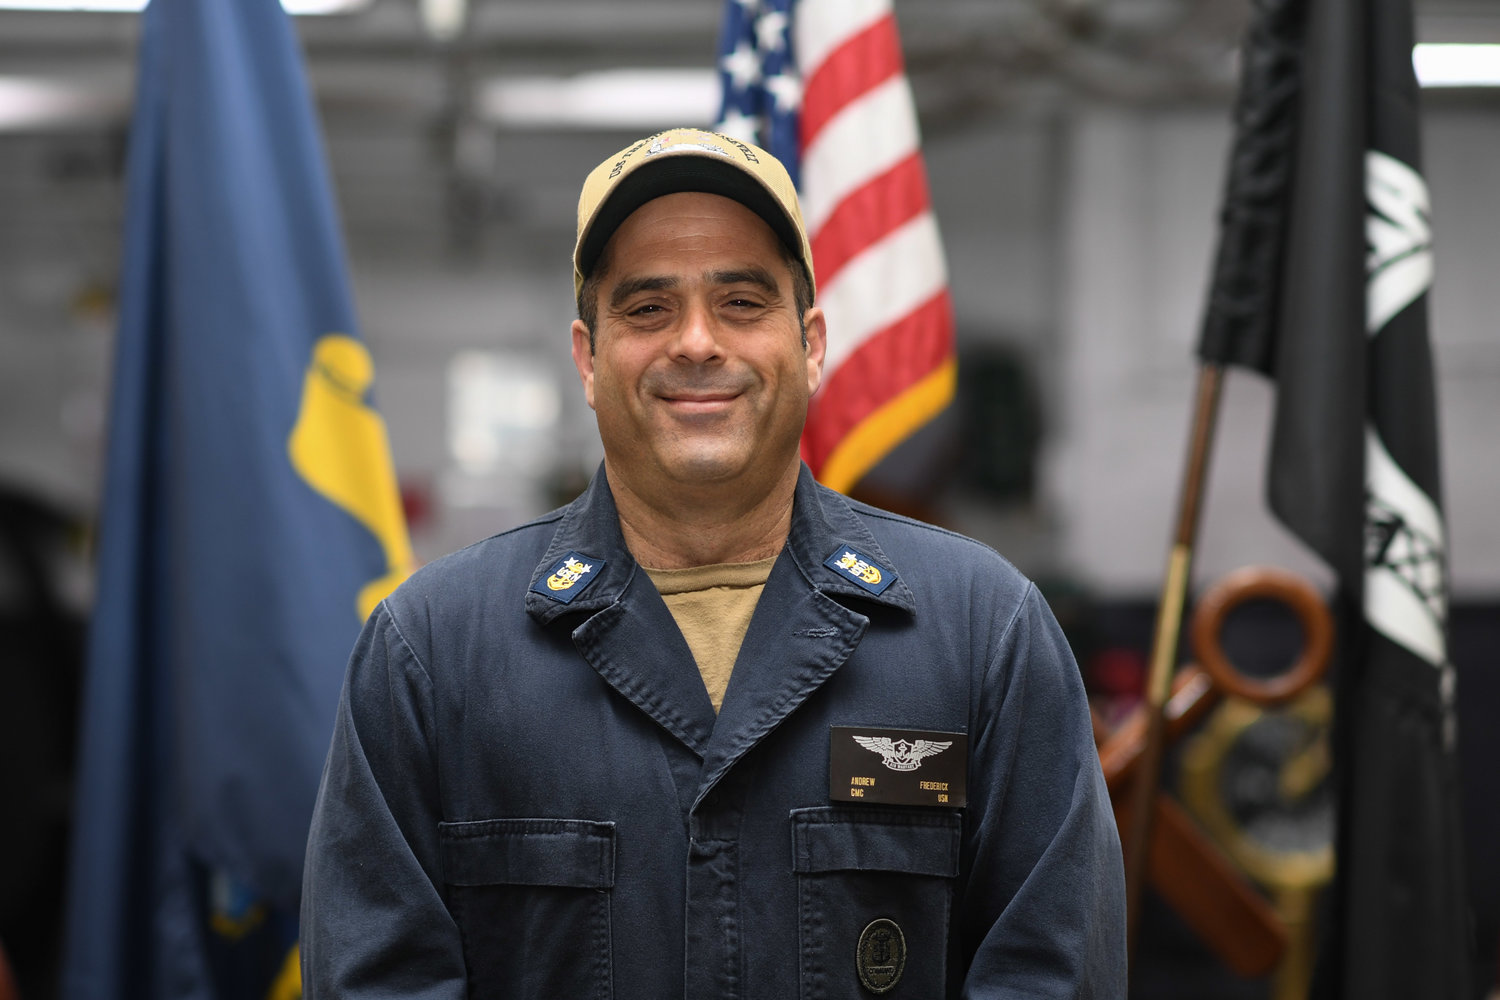 Andrew Frederick, who graduated from East Meadow High School in 1984, is a command master chief in the U.S. Navy aboard the aircraft carrier USS Theodore Roosevelt.